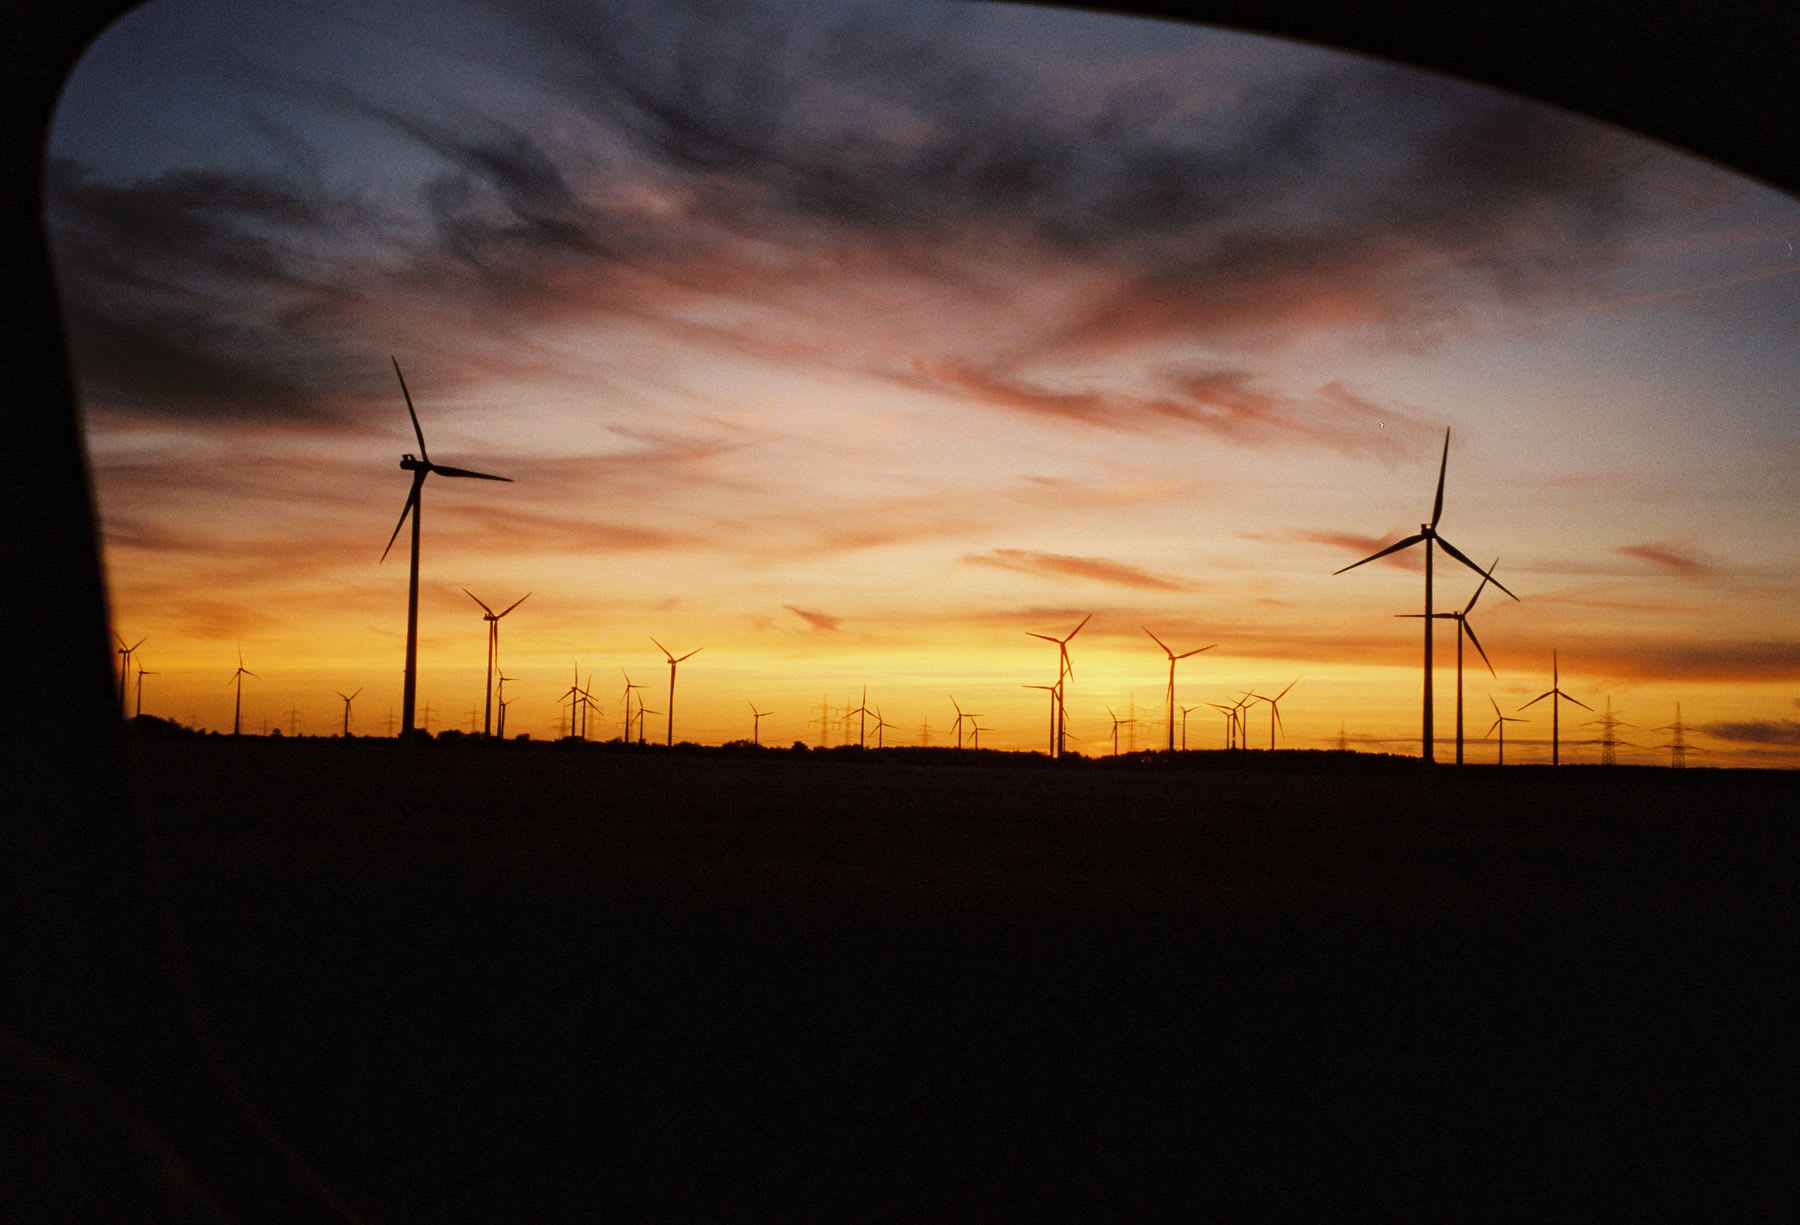 Wind turbines silhouetted against a vibrant sunset sky, viewed from inside a vehicle.